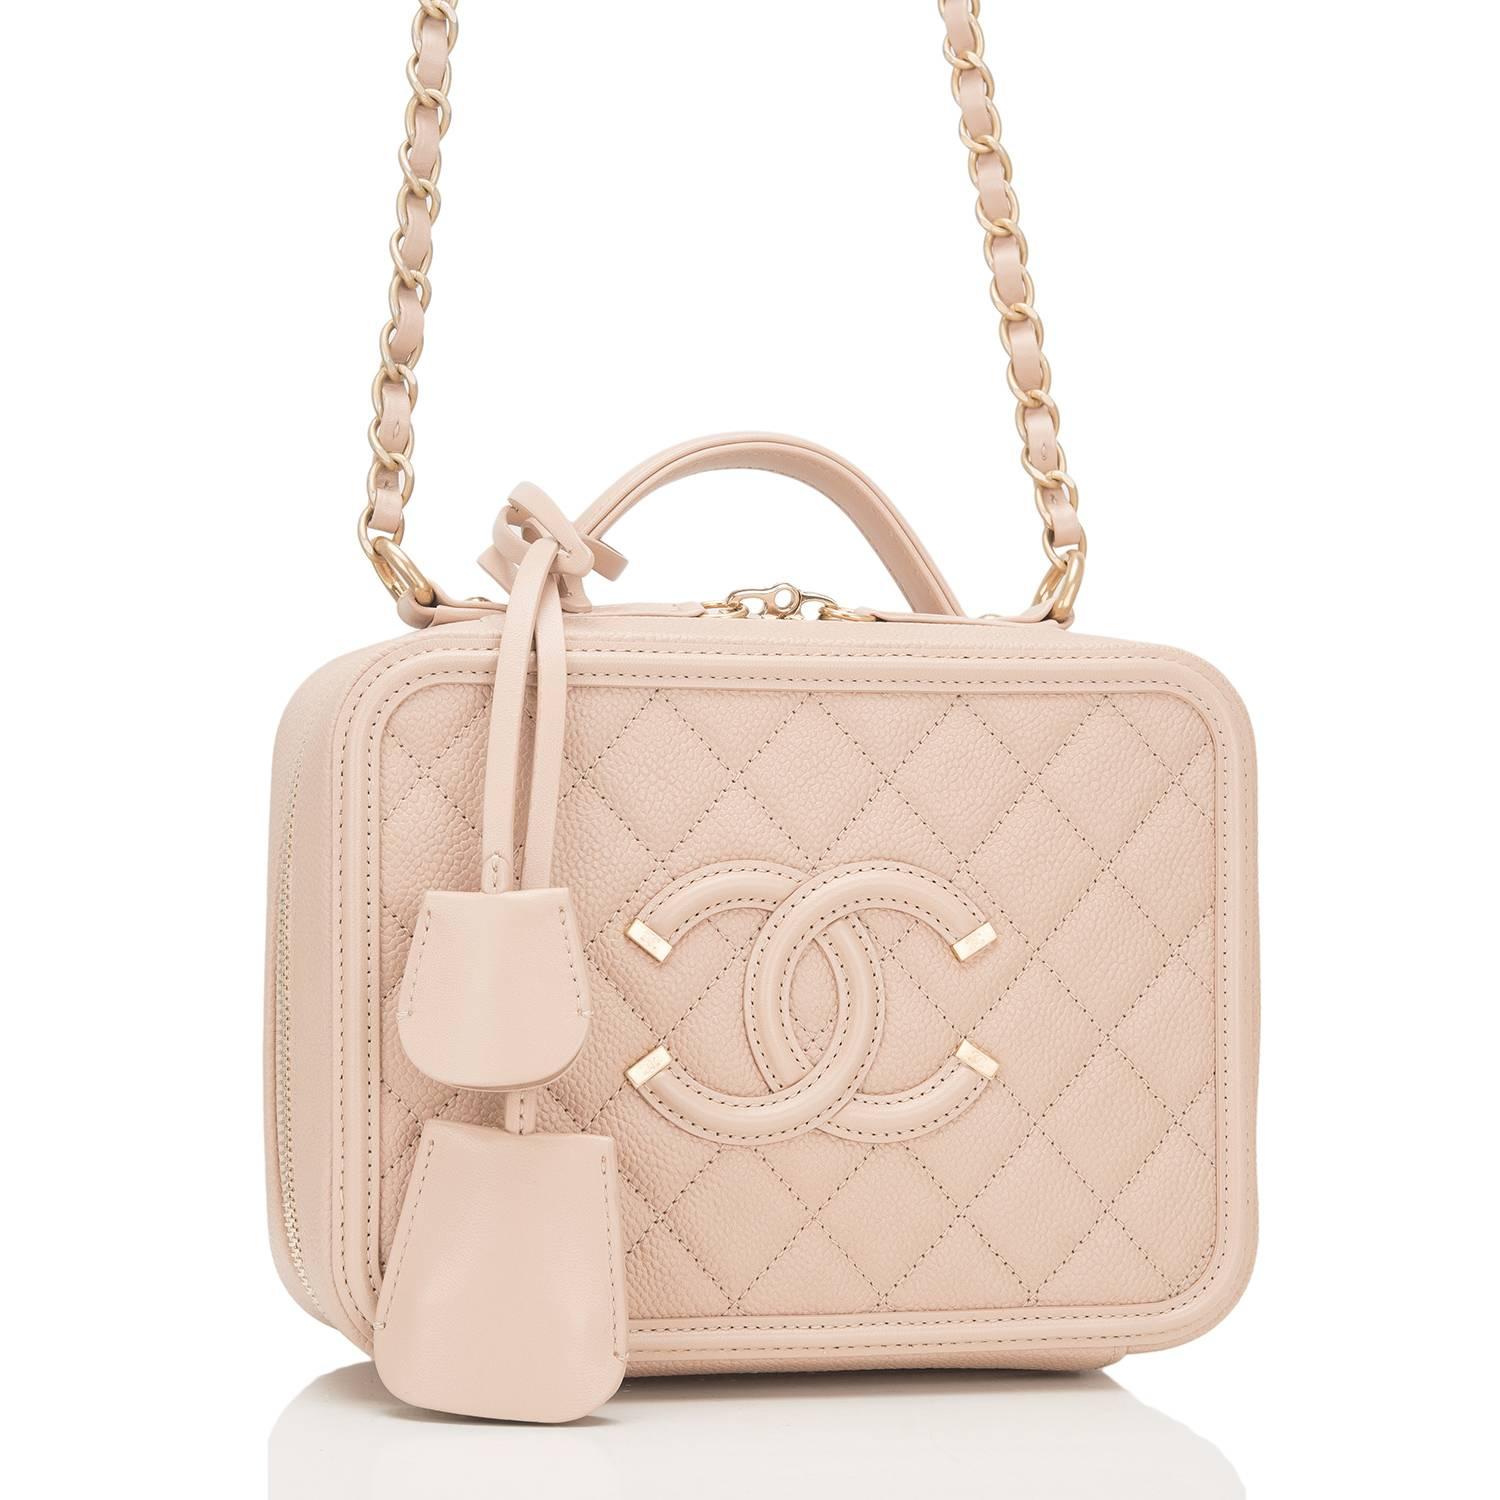 Chanel Small Filigree Vanity Case of light beige caviar leather with gold tone hardware.

This bag features Chanel's signature CC logo stitch in on the front, a gold tone CC lock with a clochette, a matching key with another clochette, zip around